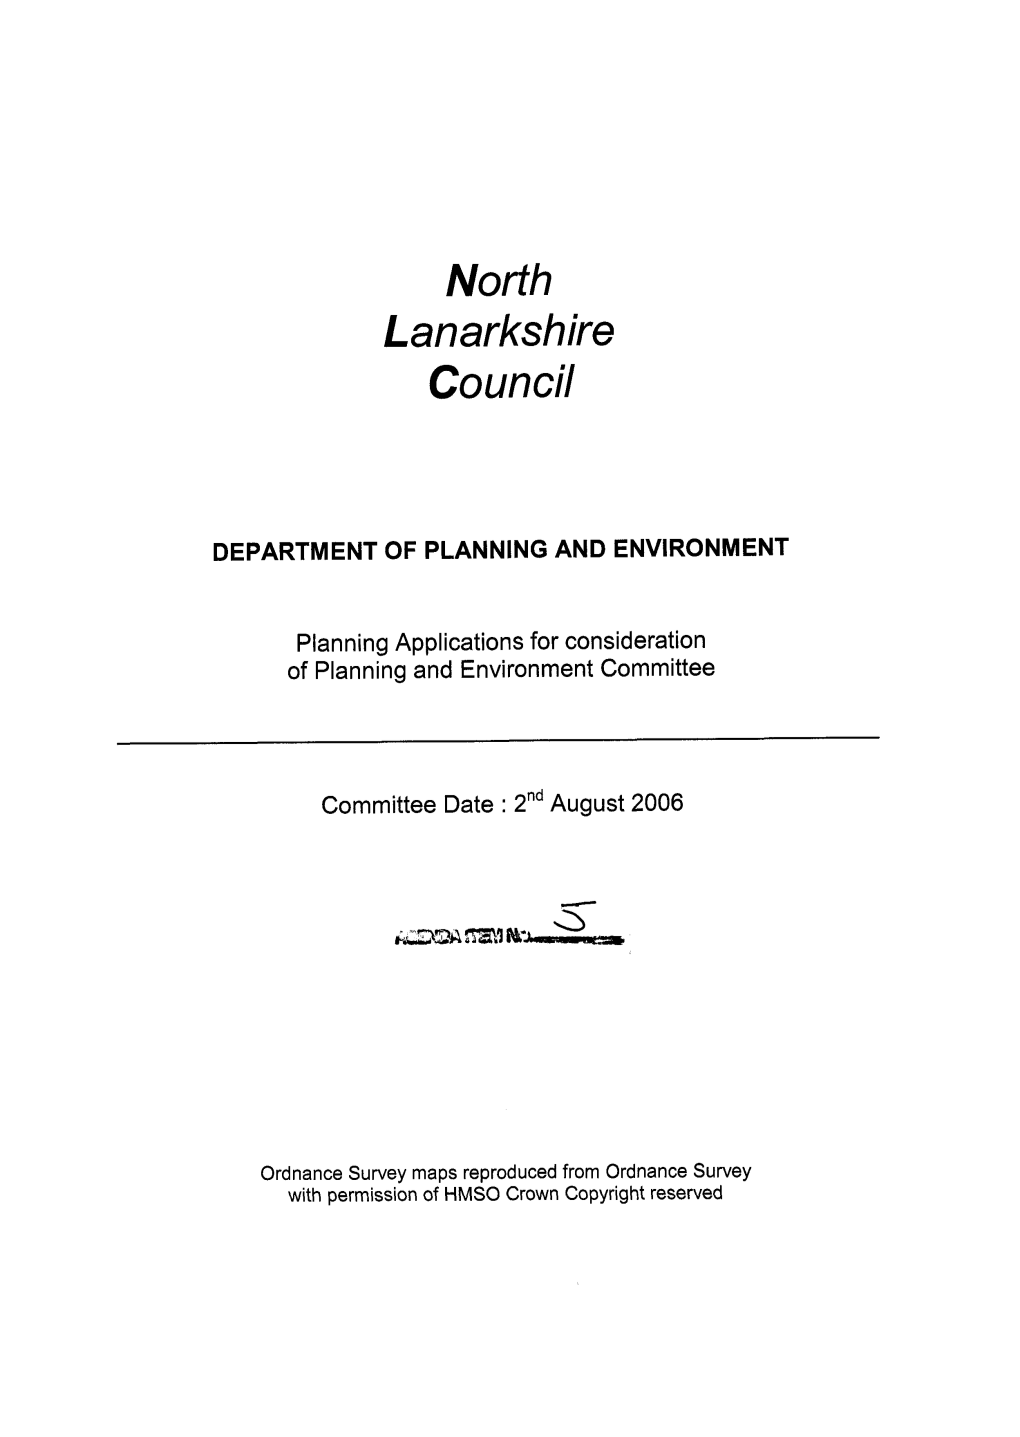 North Lanarkshire Council DEPARTMENT of PLANNING